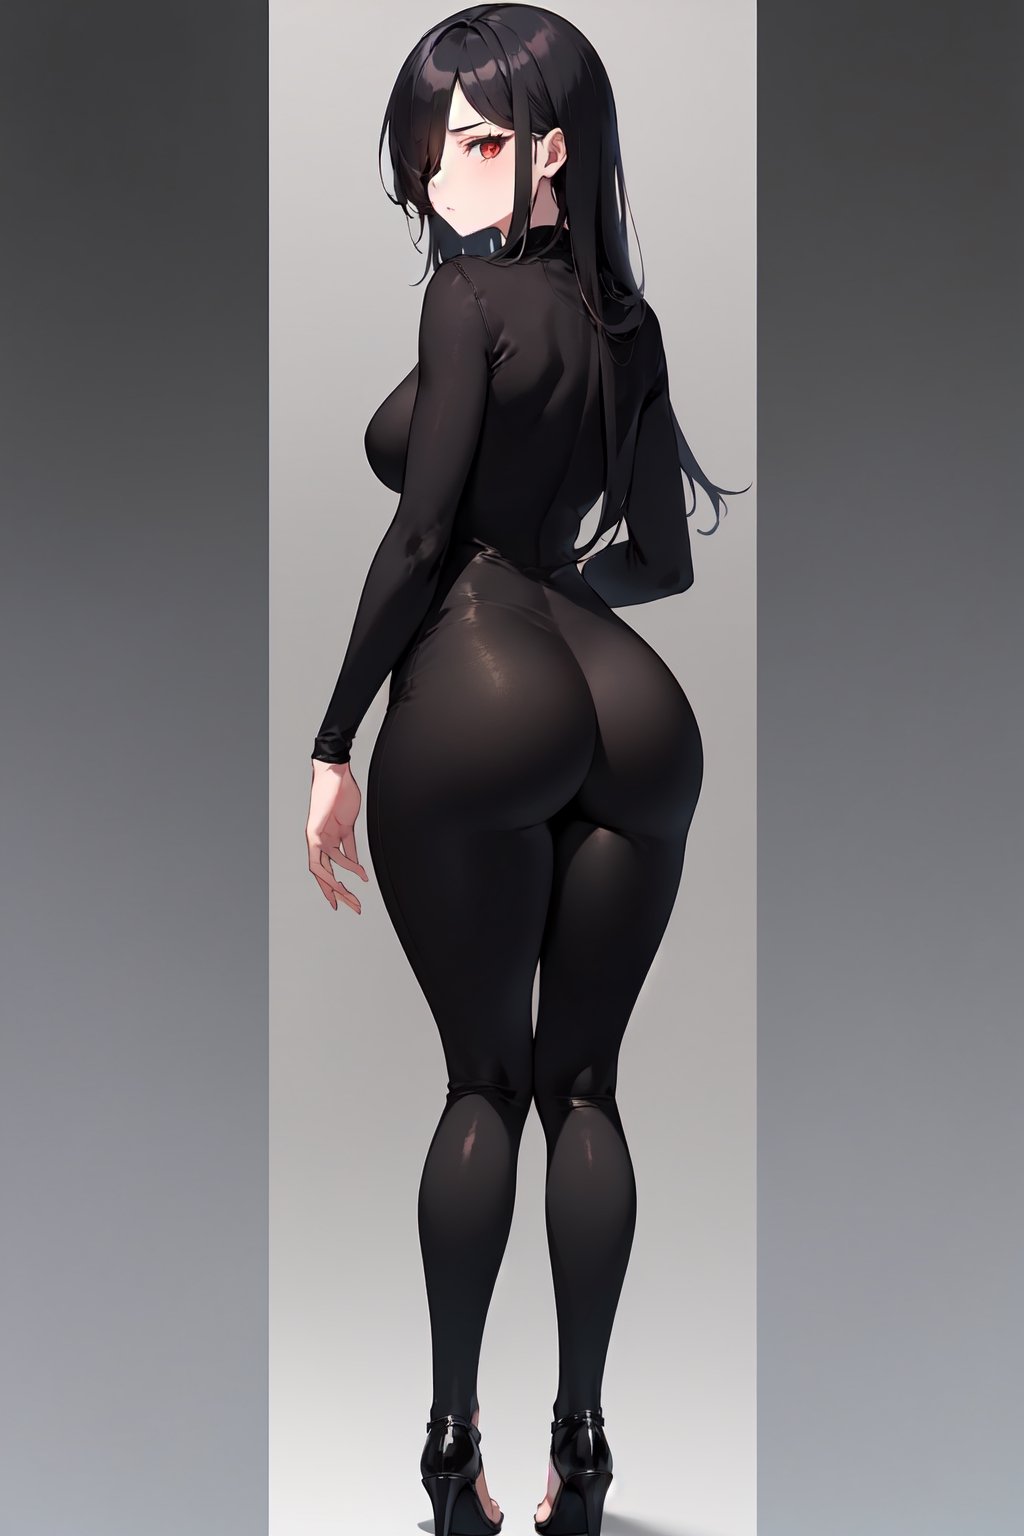 best quality, masterpiece, 1 girl, white skin, long hair, hair over one eye, black hair, perfecteyes, red eyes, Toned curvy body, round ass, (black body suit:1.5), Look at viewer, full body, standing, from behind, focused ass, diffusion, extremely detailed , 16k wallpaper, sharpened.